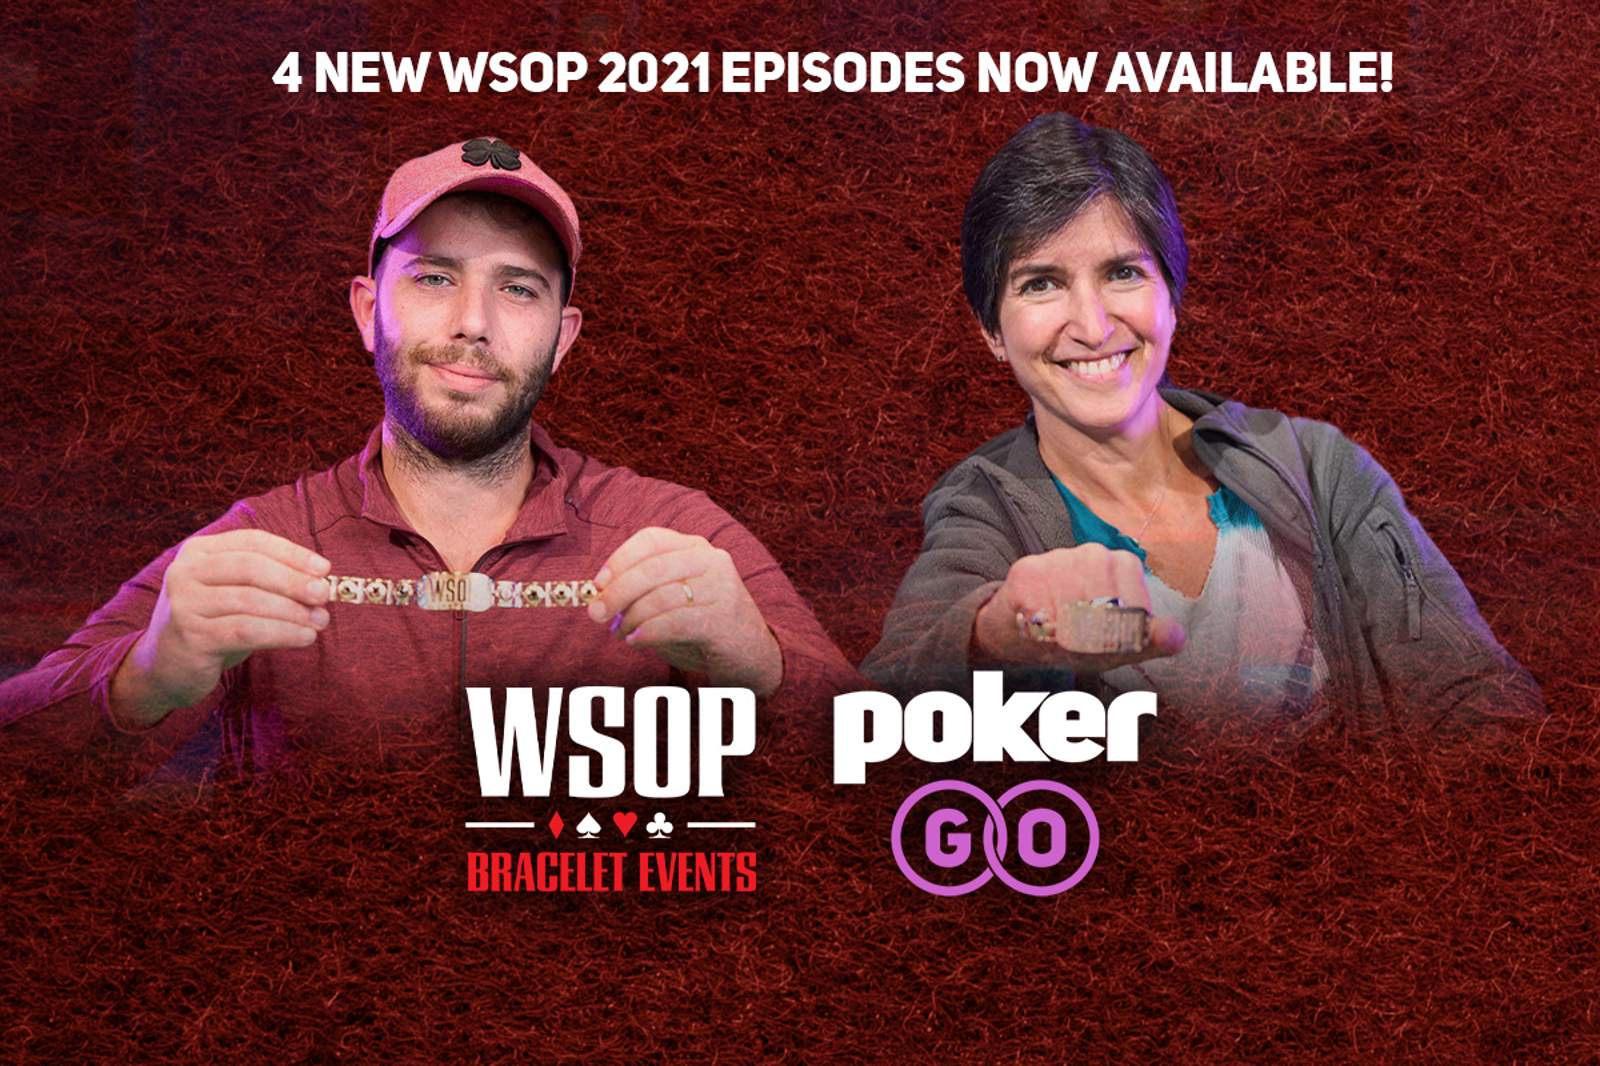 Episodes 9-12 Now Available from 2021 WSOP Bracelet Events